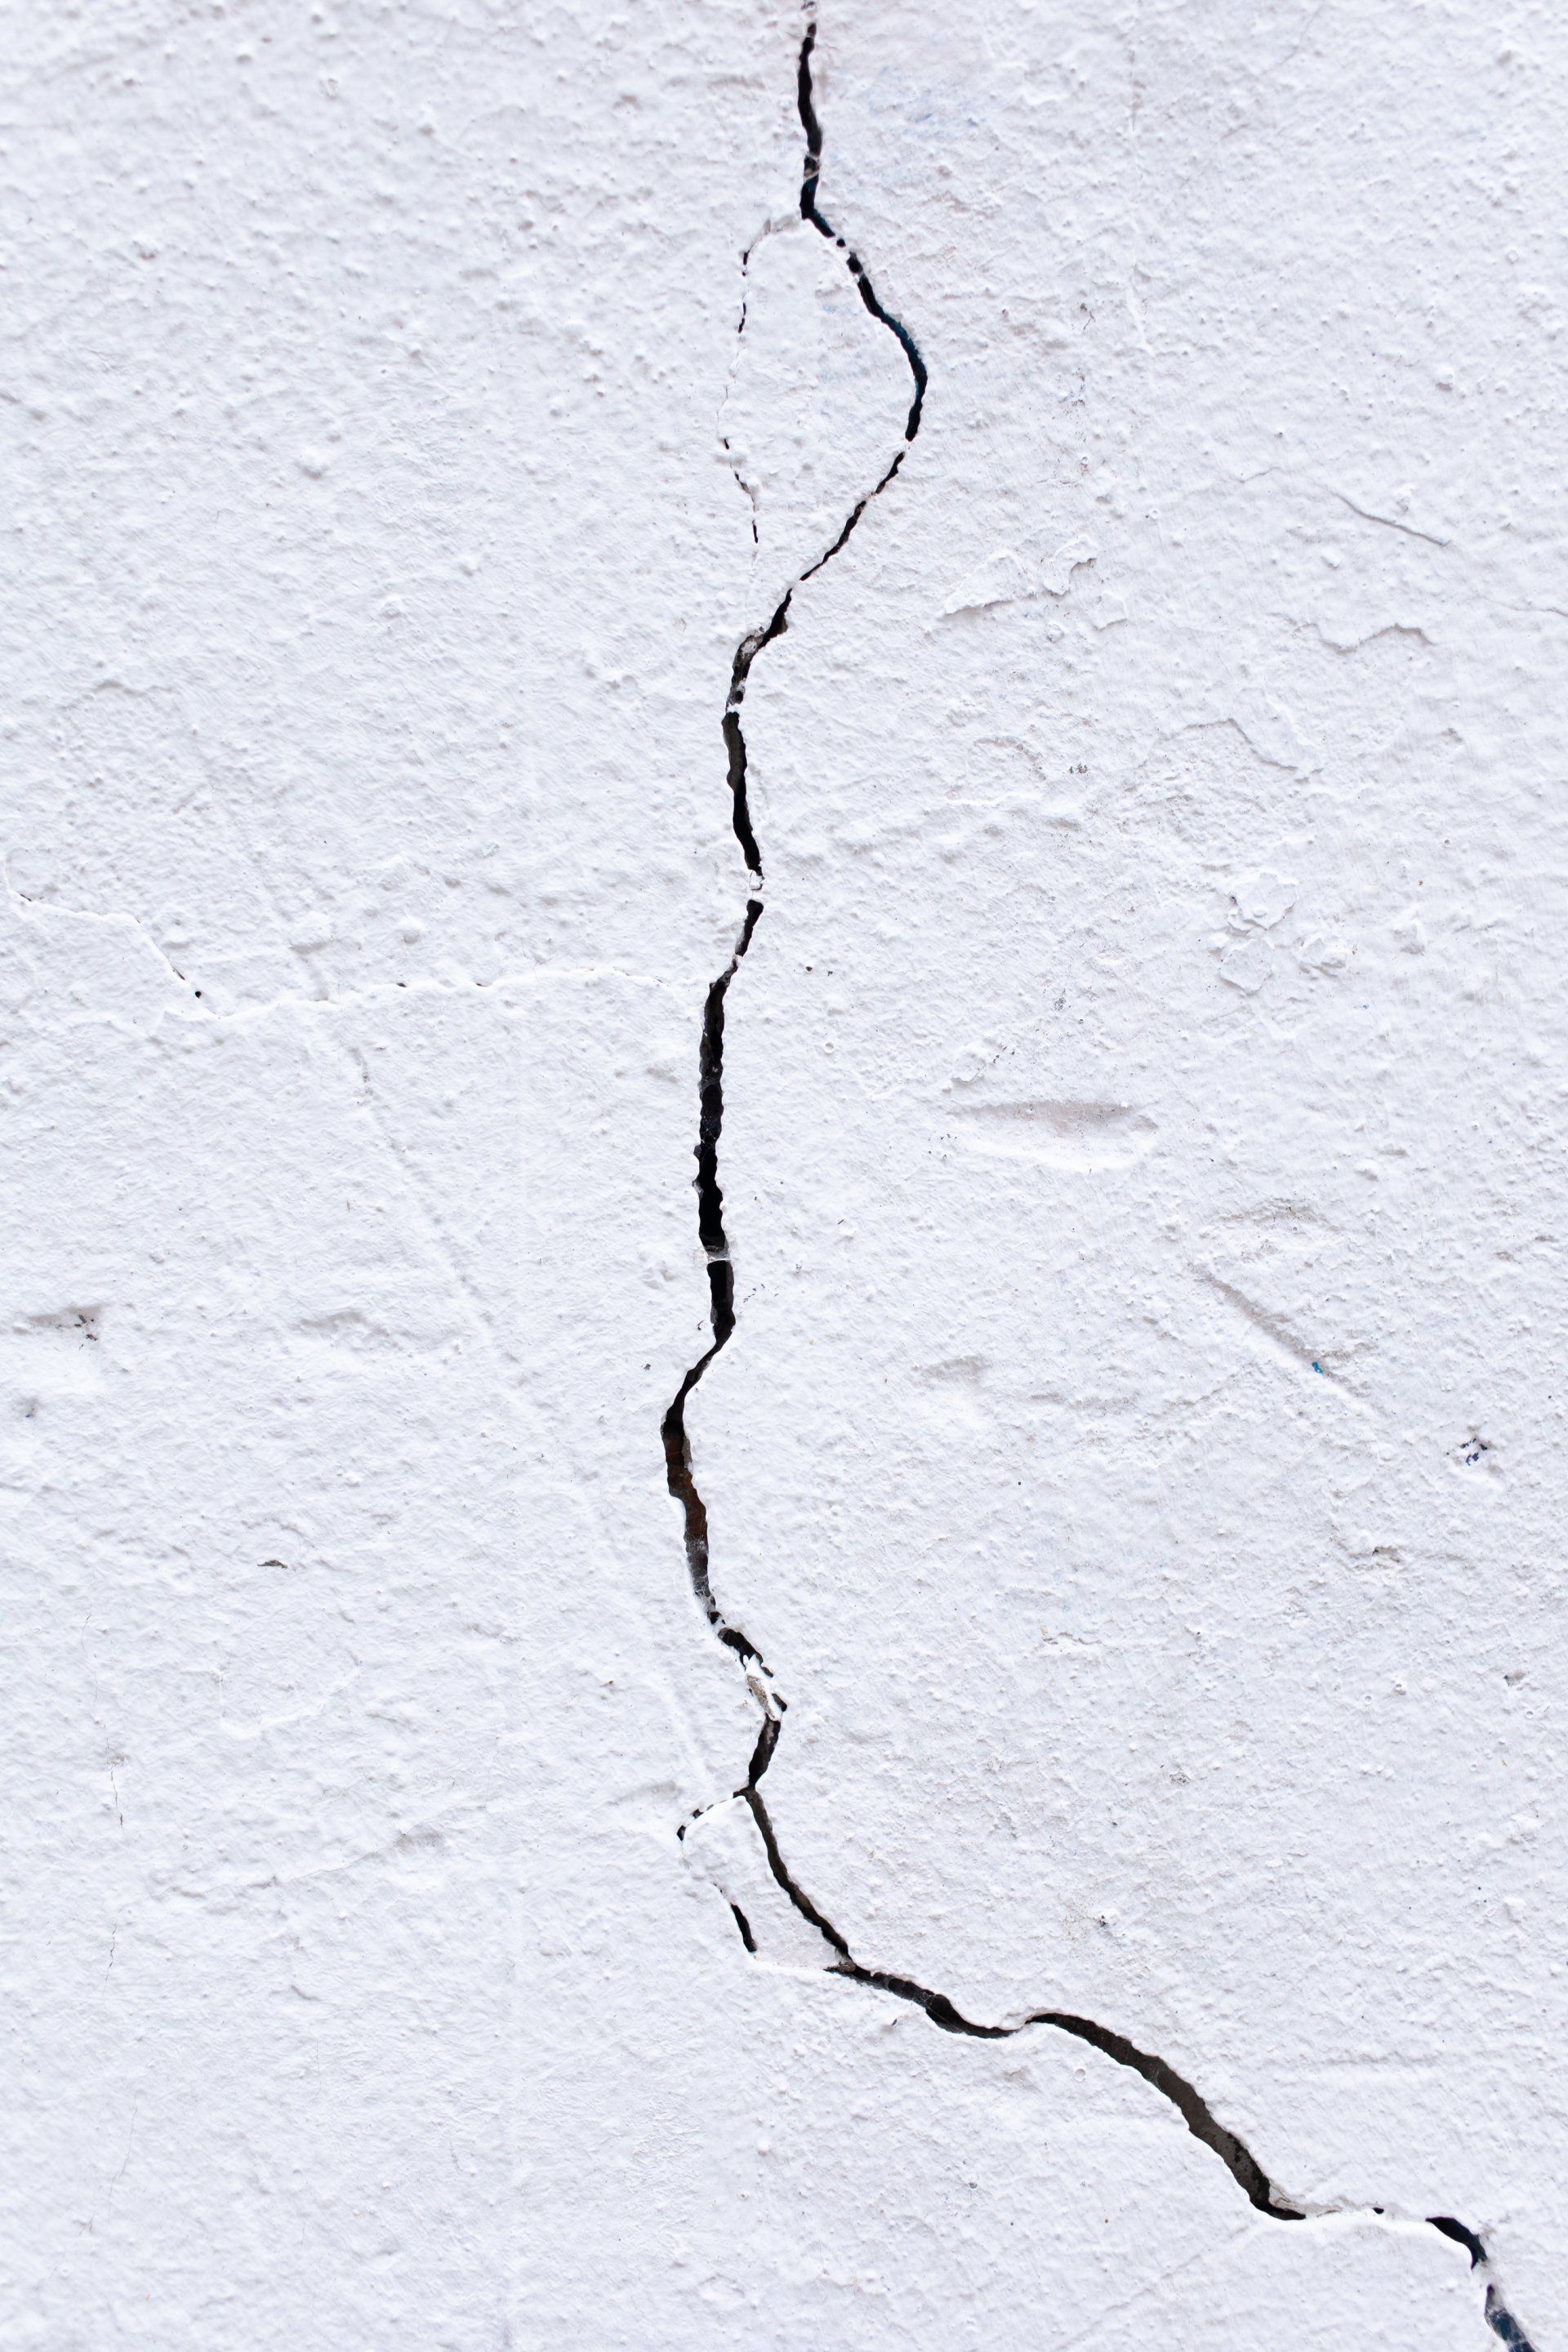 crack on wall